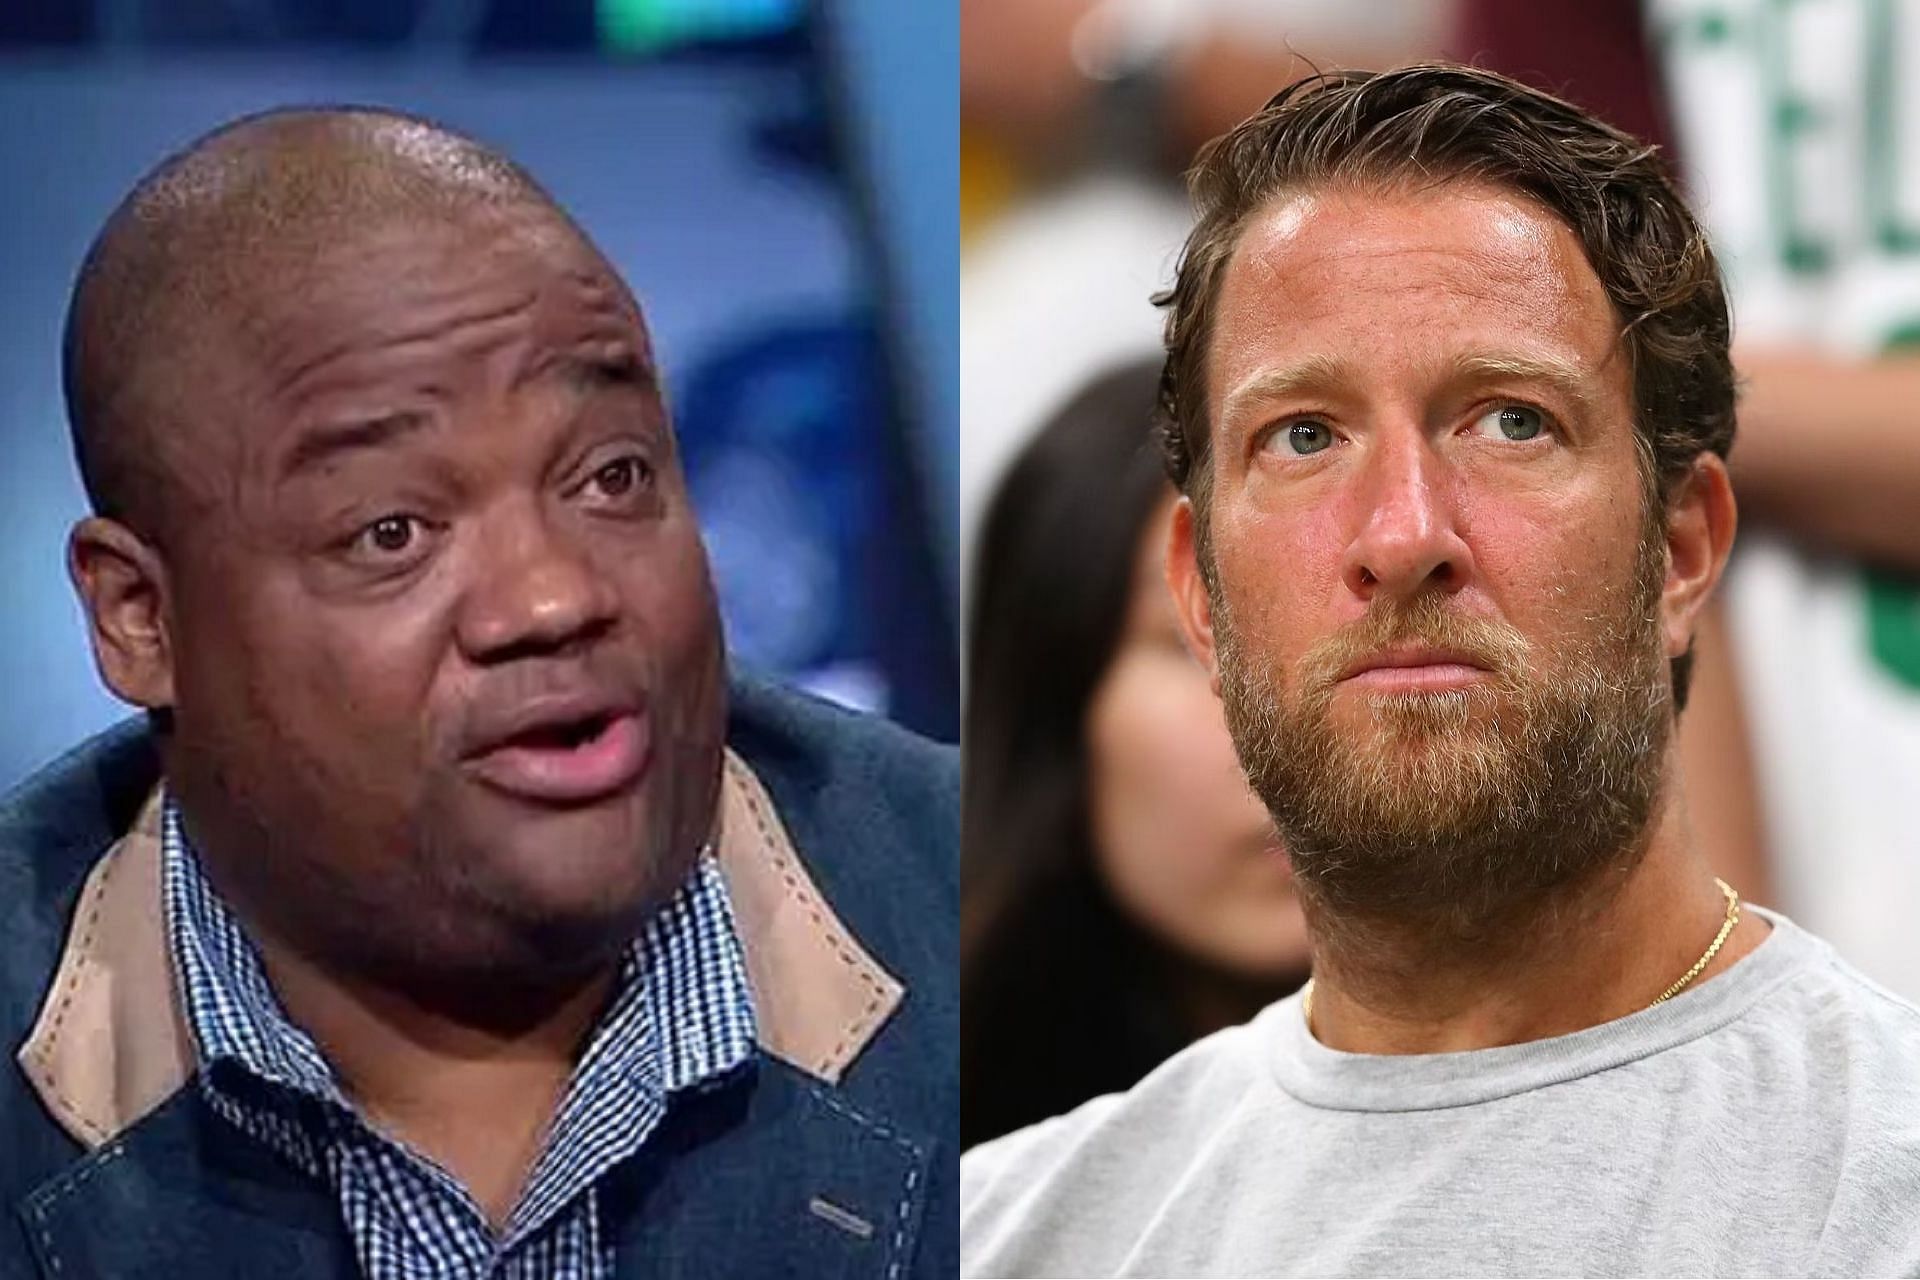 Jason Whitlock and Dave Portnoy (Pic Readjusted from Variety.com and Getty)